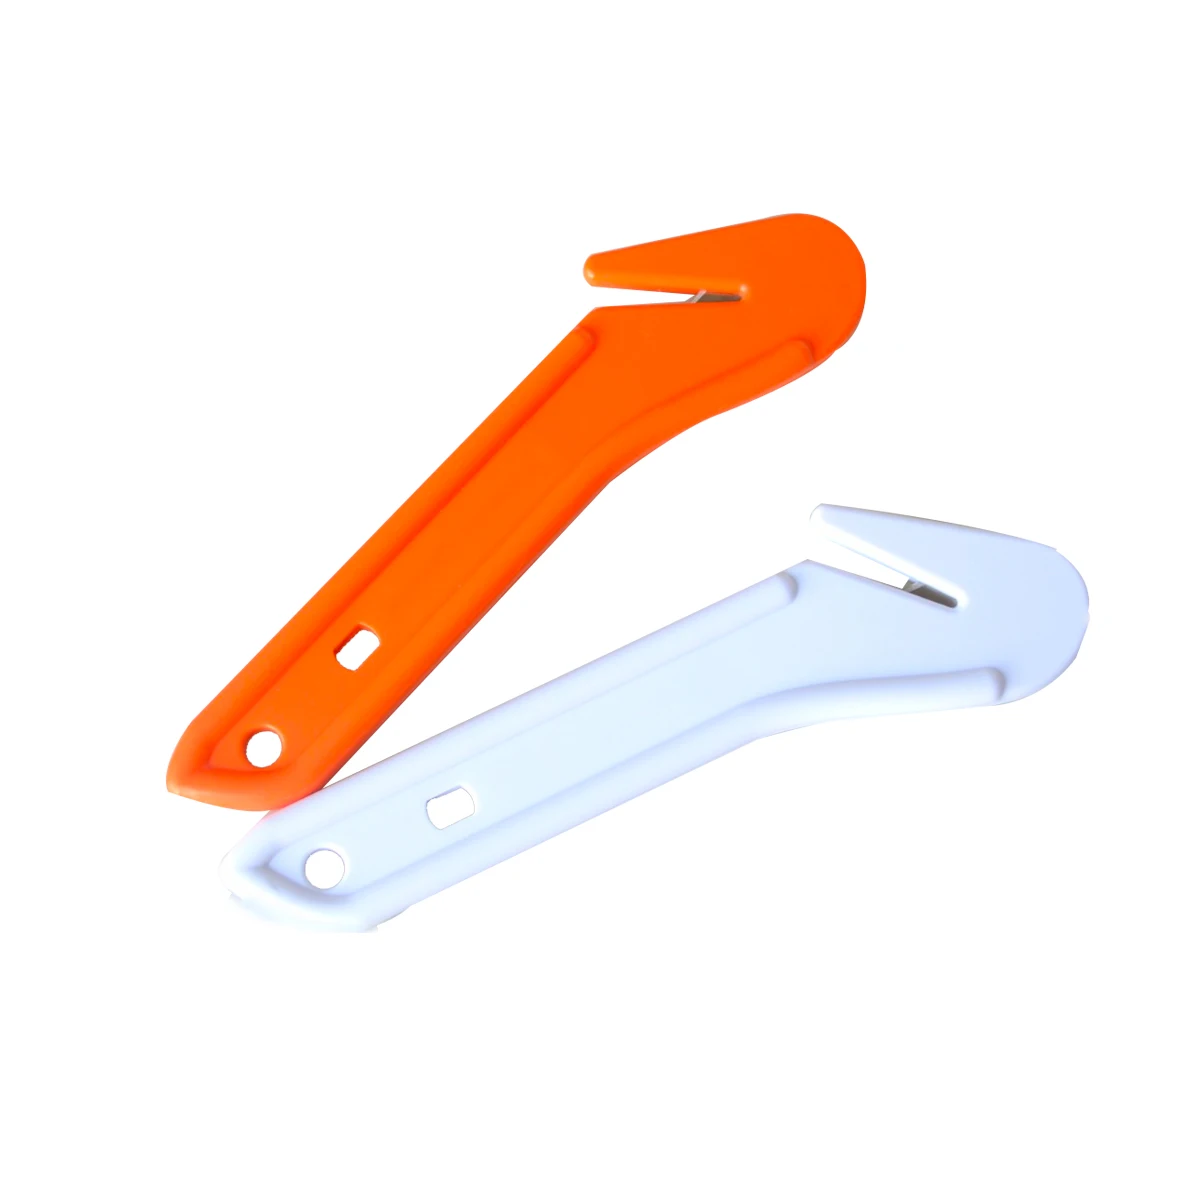 1piece New Safety Cutter Emergency Car Seatbelt Guard Knife First Aid Rescue Survival Tip With Long Handle Color White Orange